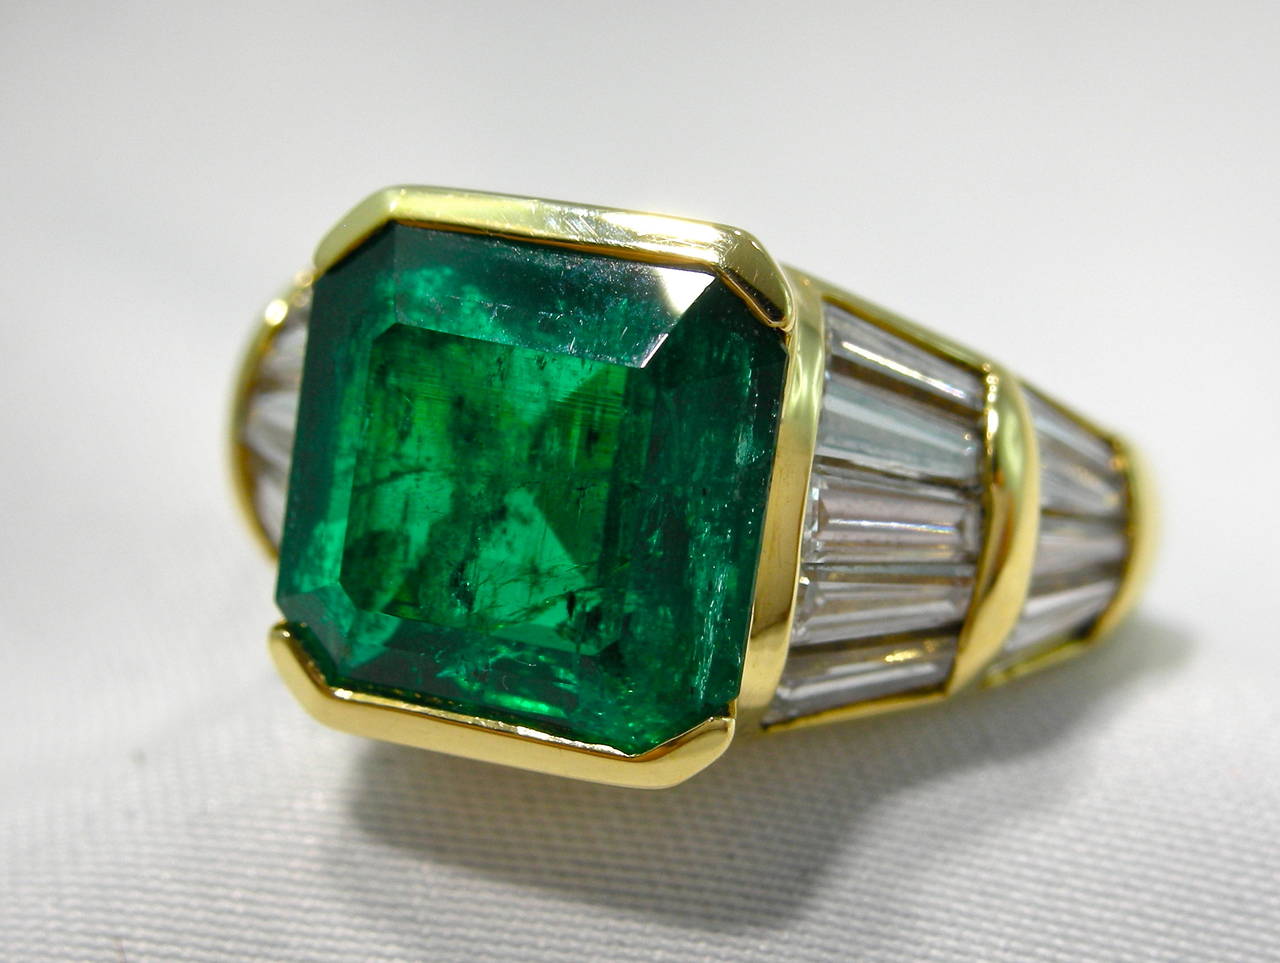 Jona design collection, 18 Karat yellow gold emerald and diamond ring. The emerald weights 3.70 carats of Colombian origin. The 20 tapered baguettes diamonds weight 2.30 carats.

US size 7.5 ; can be sized.

All of our jewelry is new and has